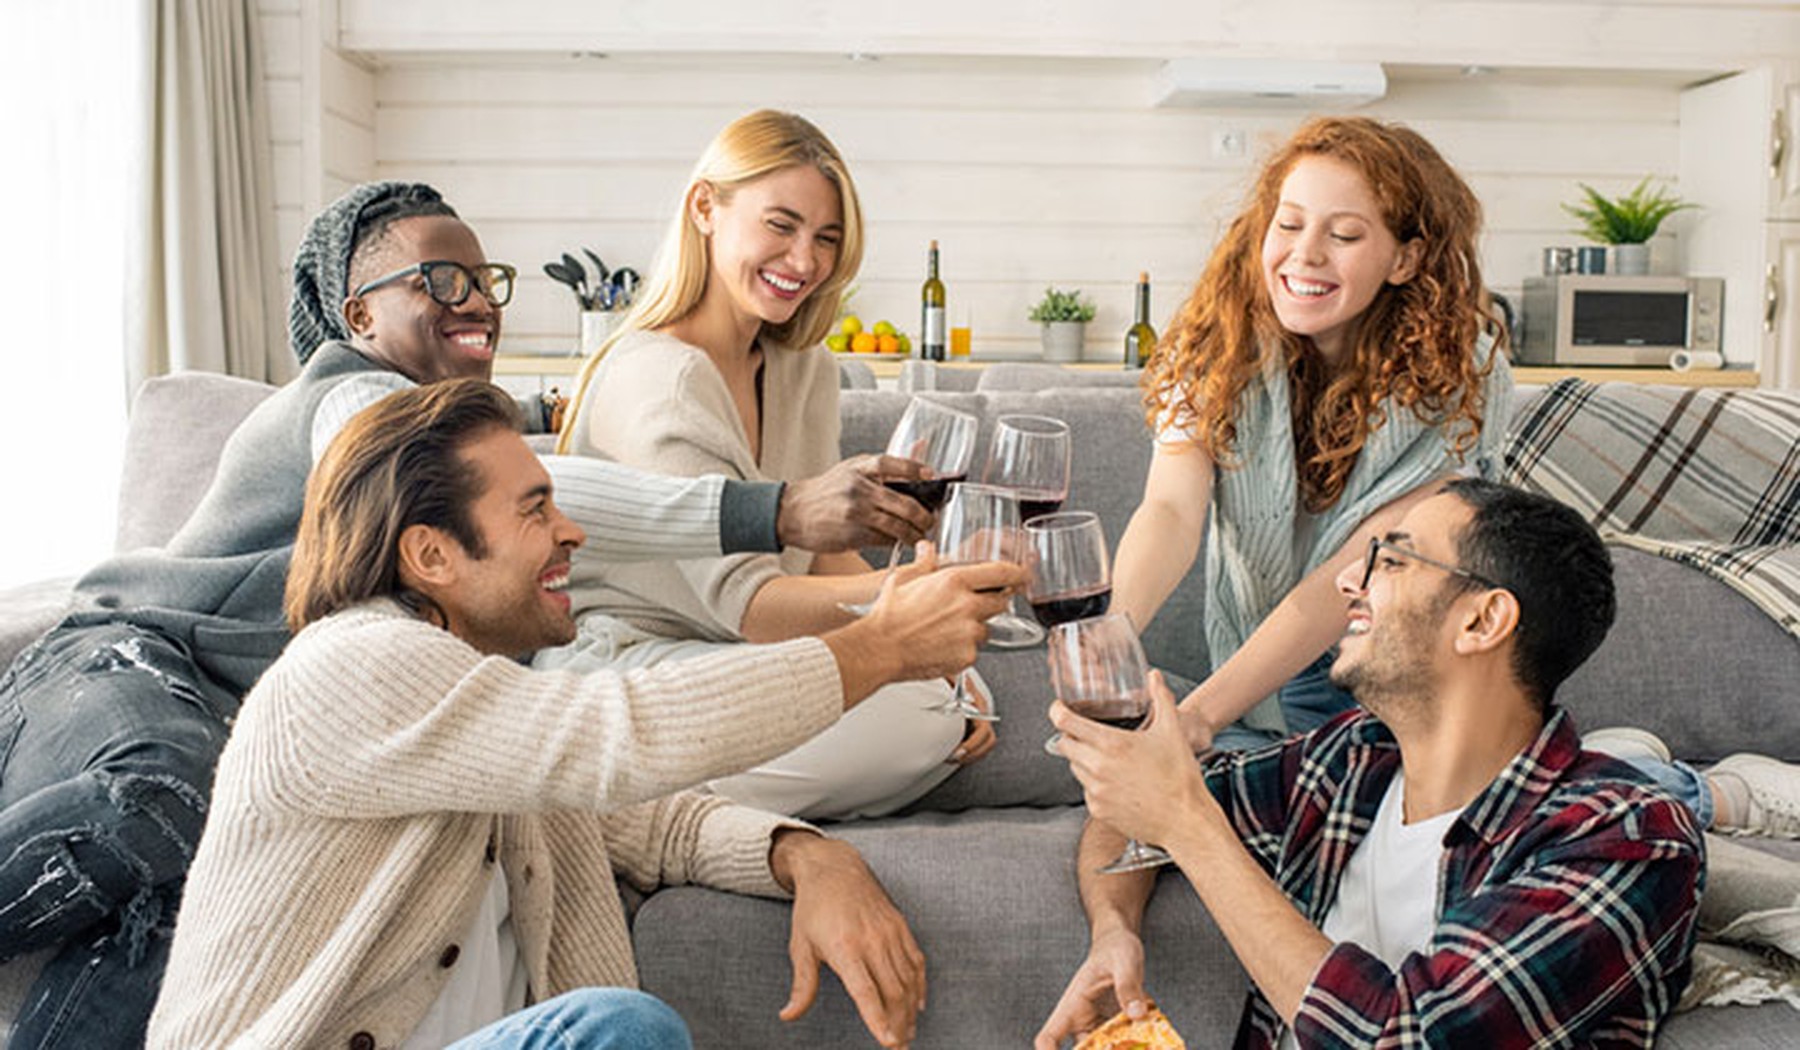 Young group of people toasting with wine glasses in a living room